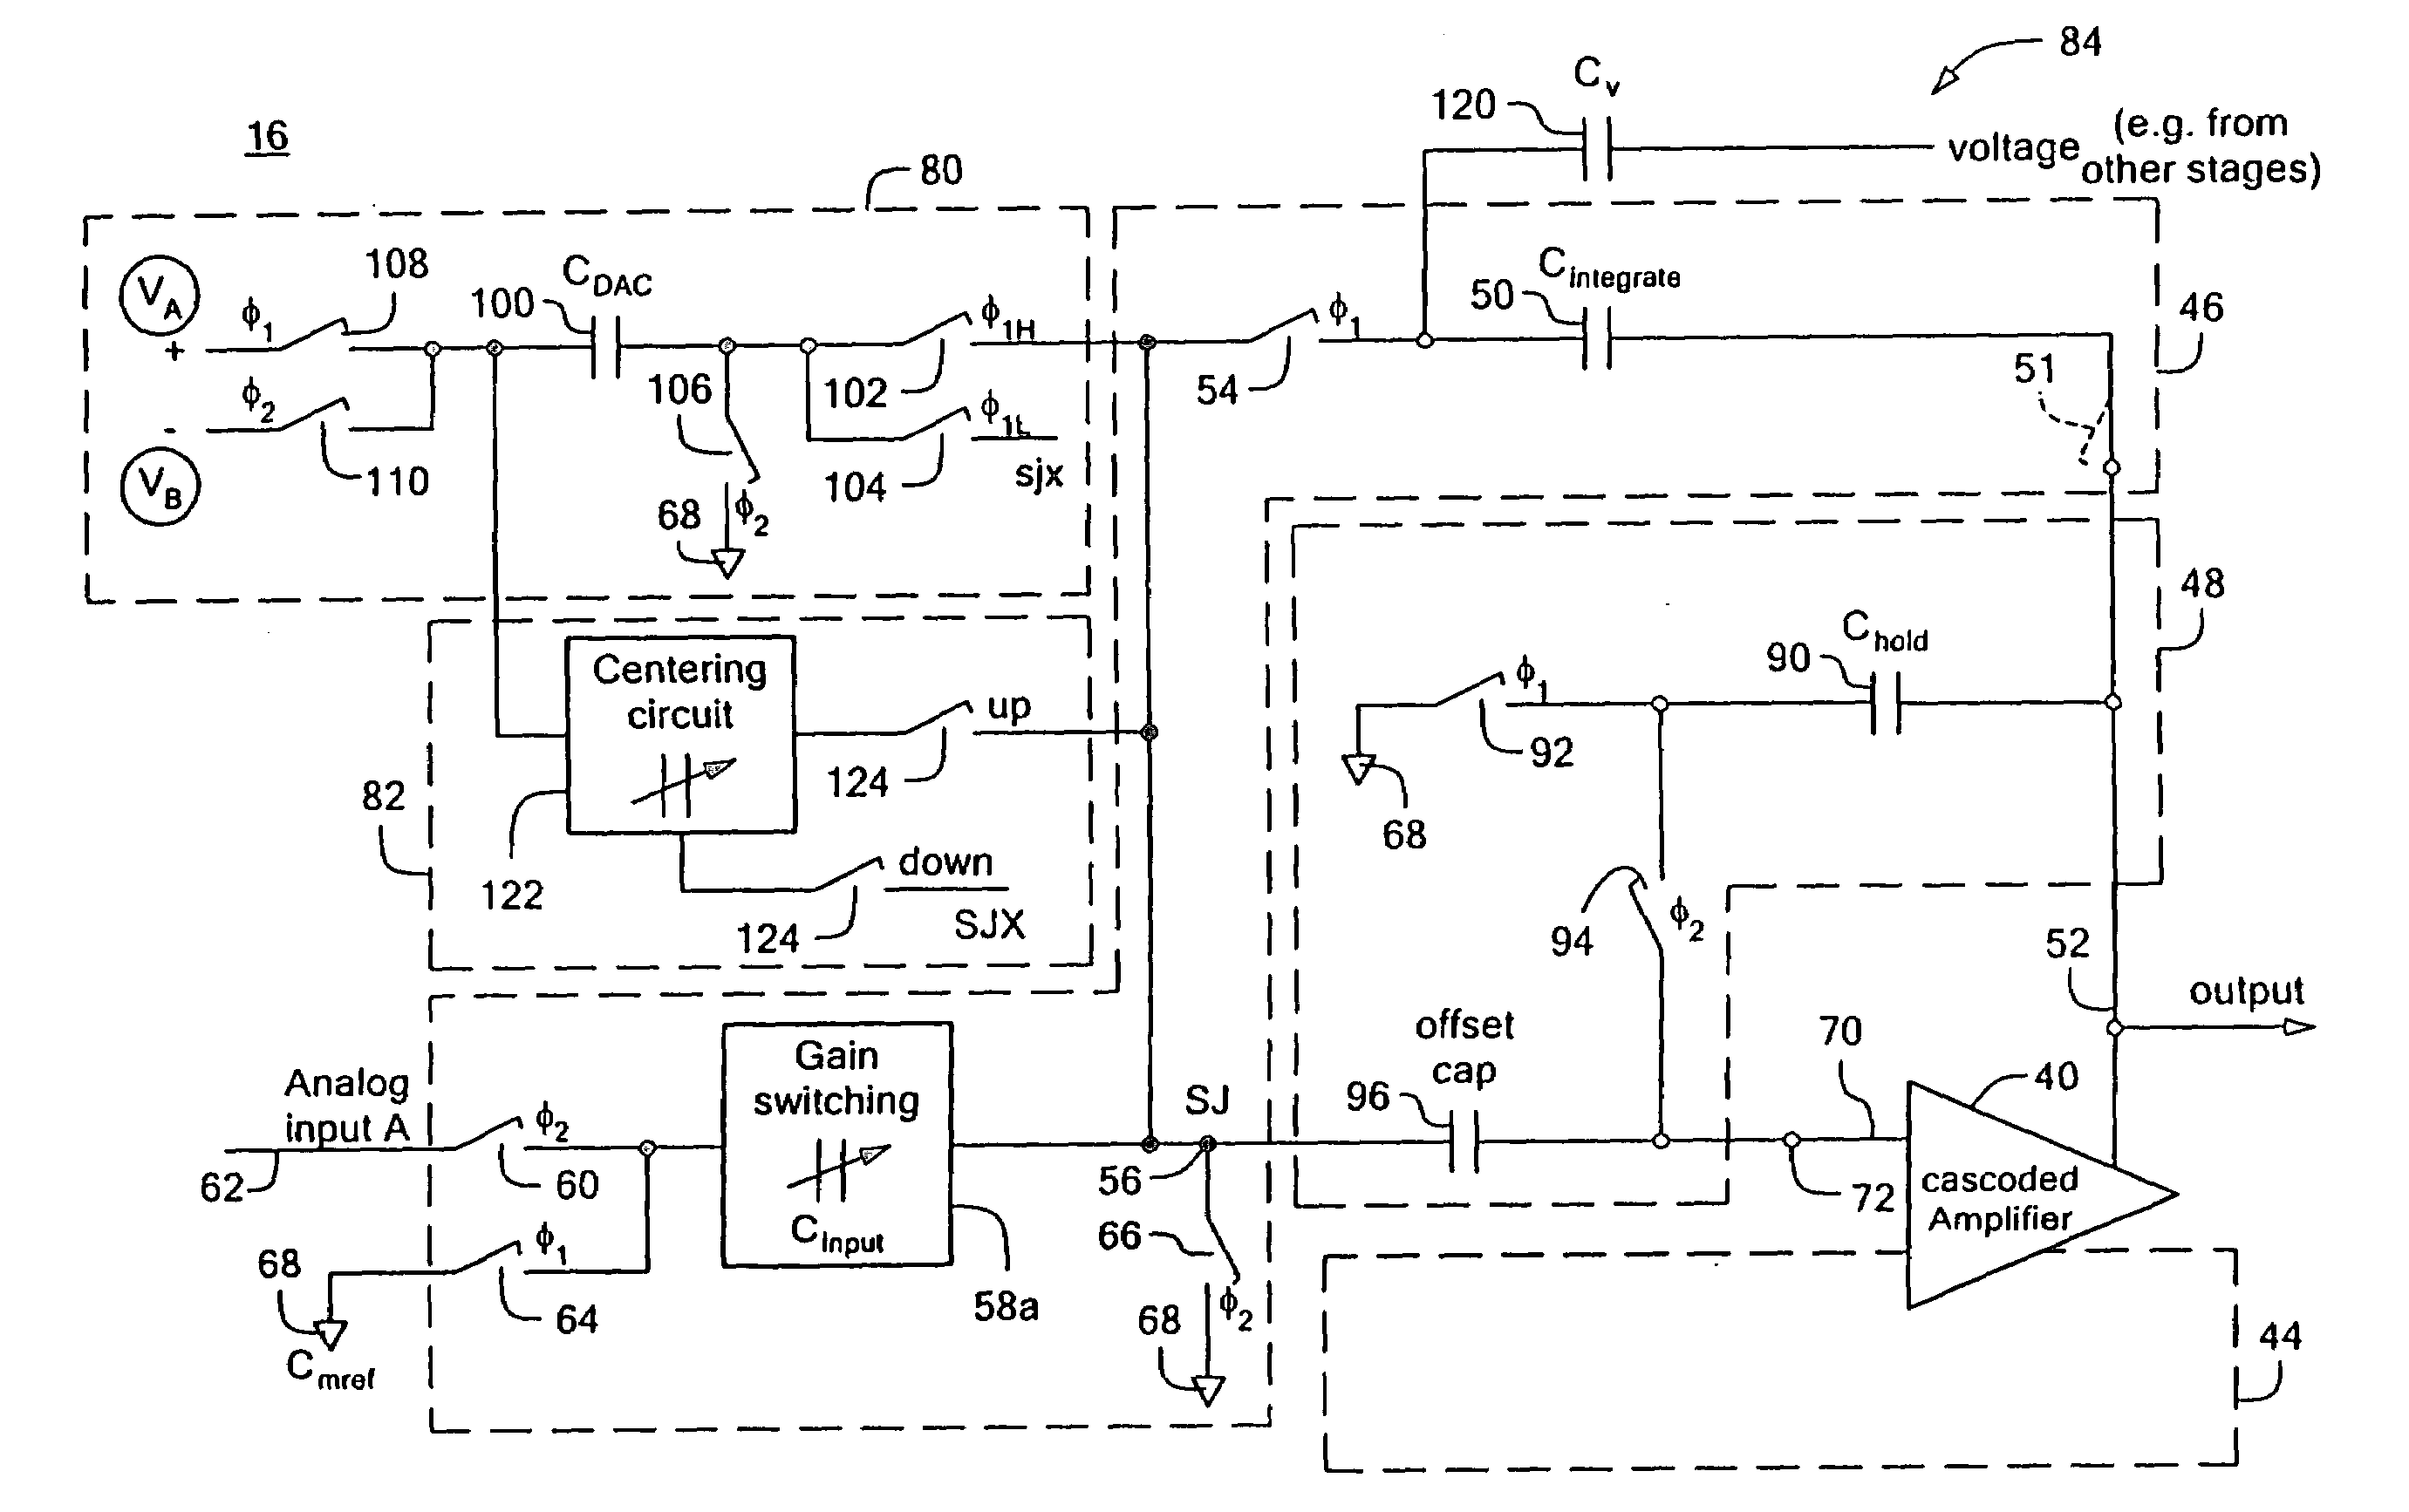 Switched capacitor integrator system